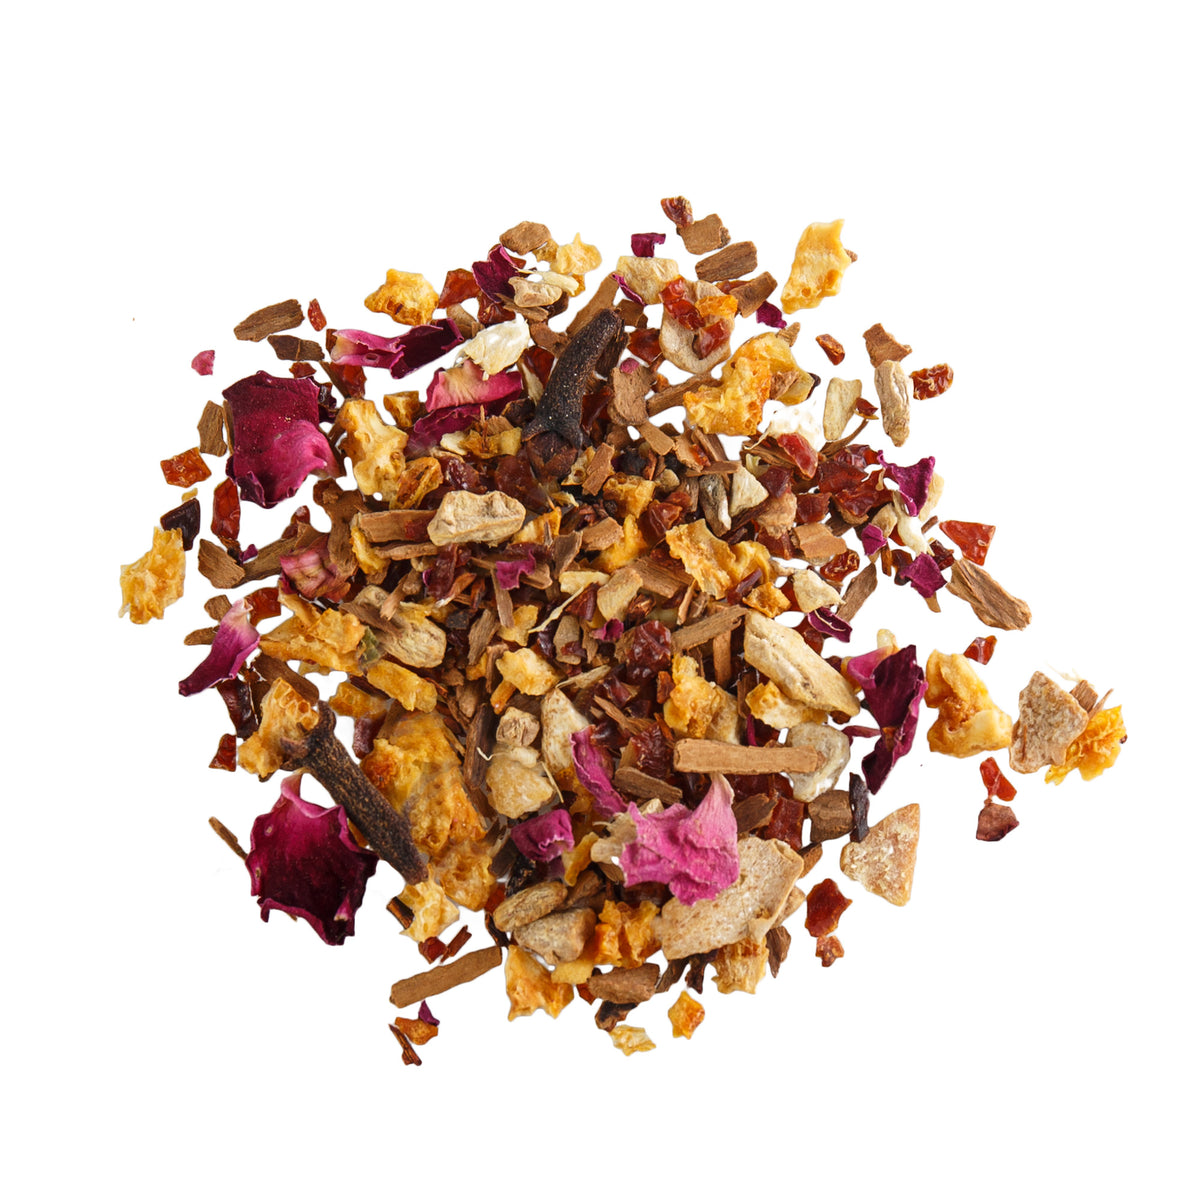 Primary Image of Spiced Rose Rooibos Tea